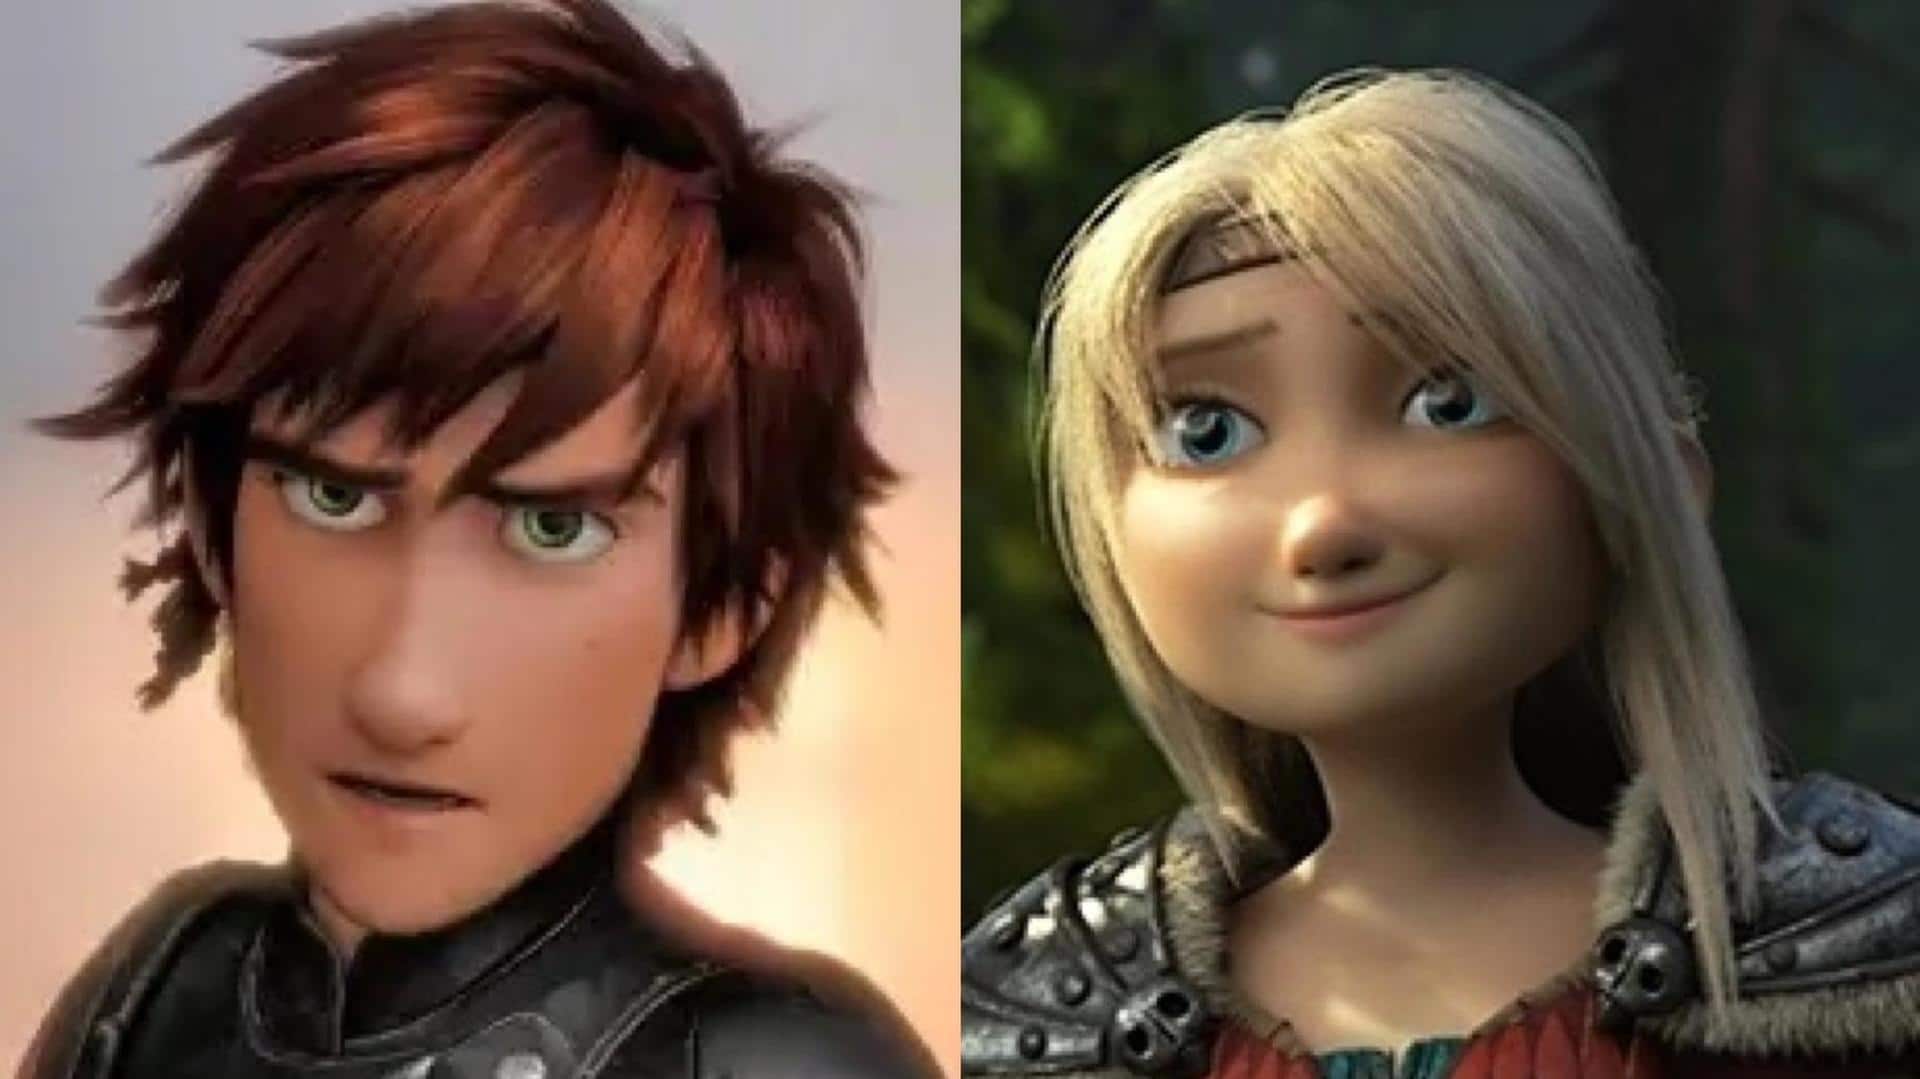 'How to Train Your Dragon' live-action gets main leads